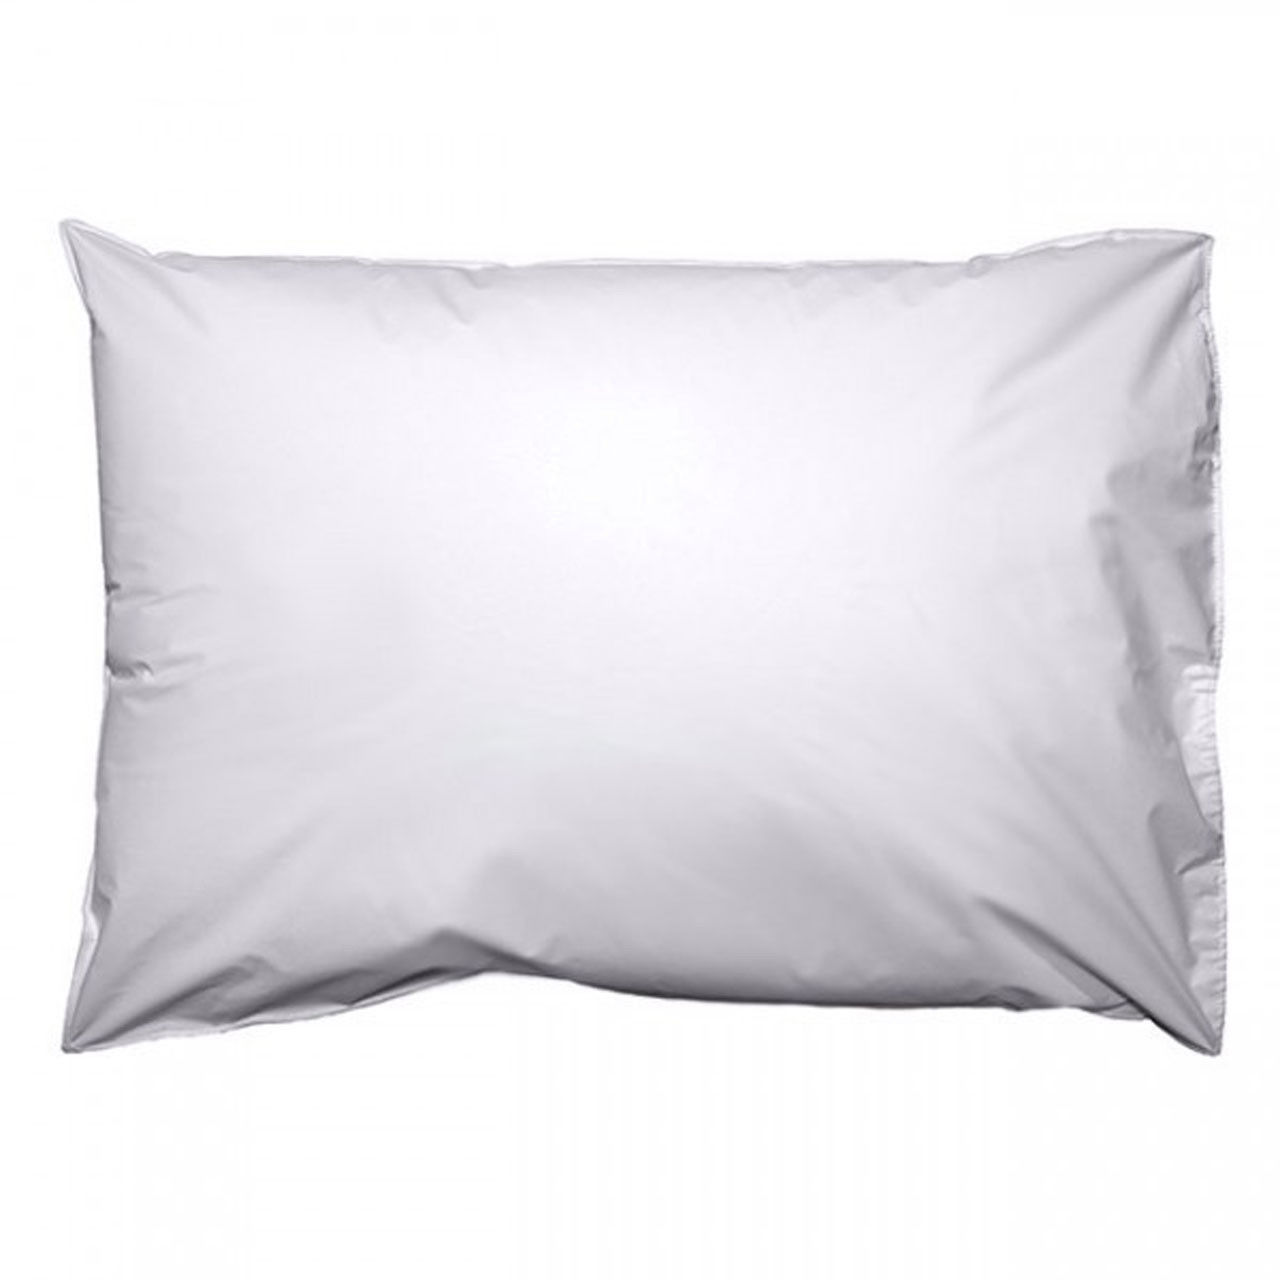 What are the dimensions of the Standard Wipeable Pillows?